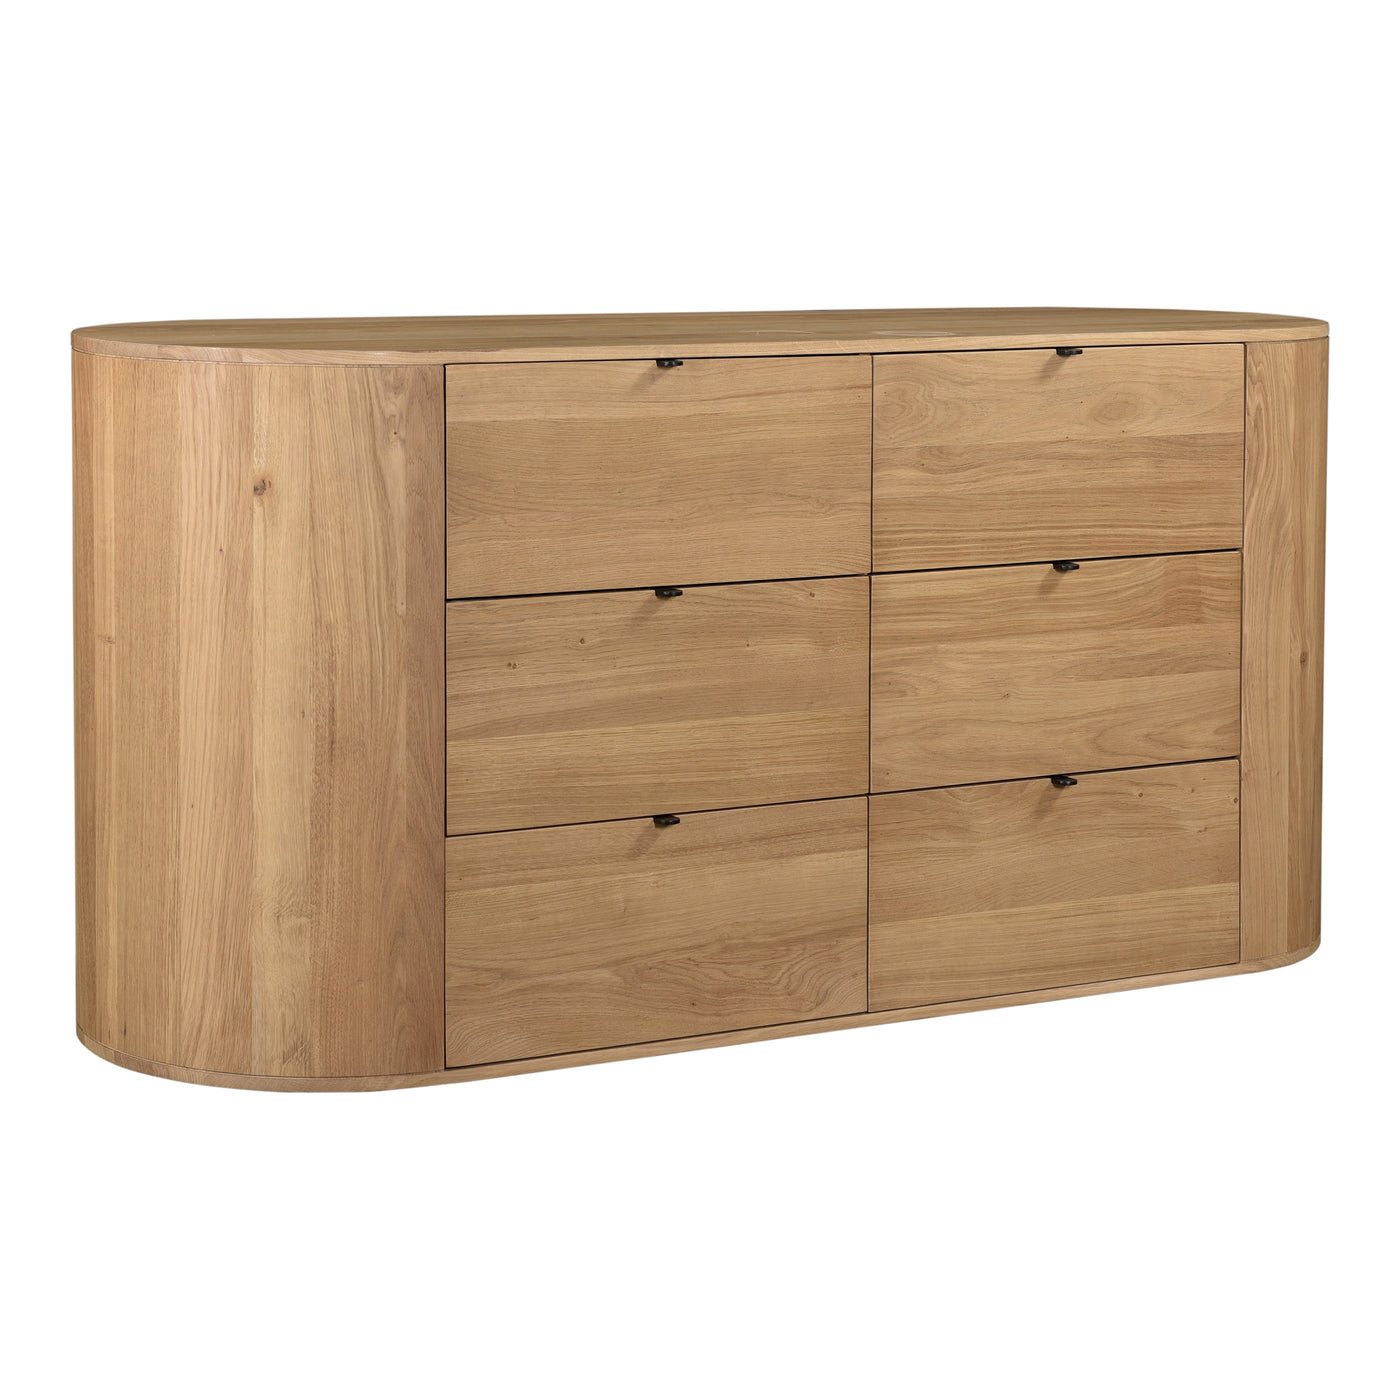 Made for the modern home connoisseur, the Scandi-chic Theo dresser has it all. This six-drawer dresser is crafted from sol...